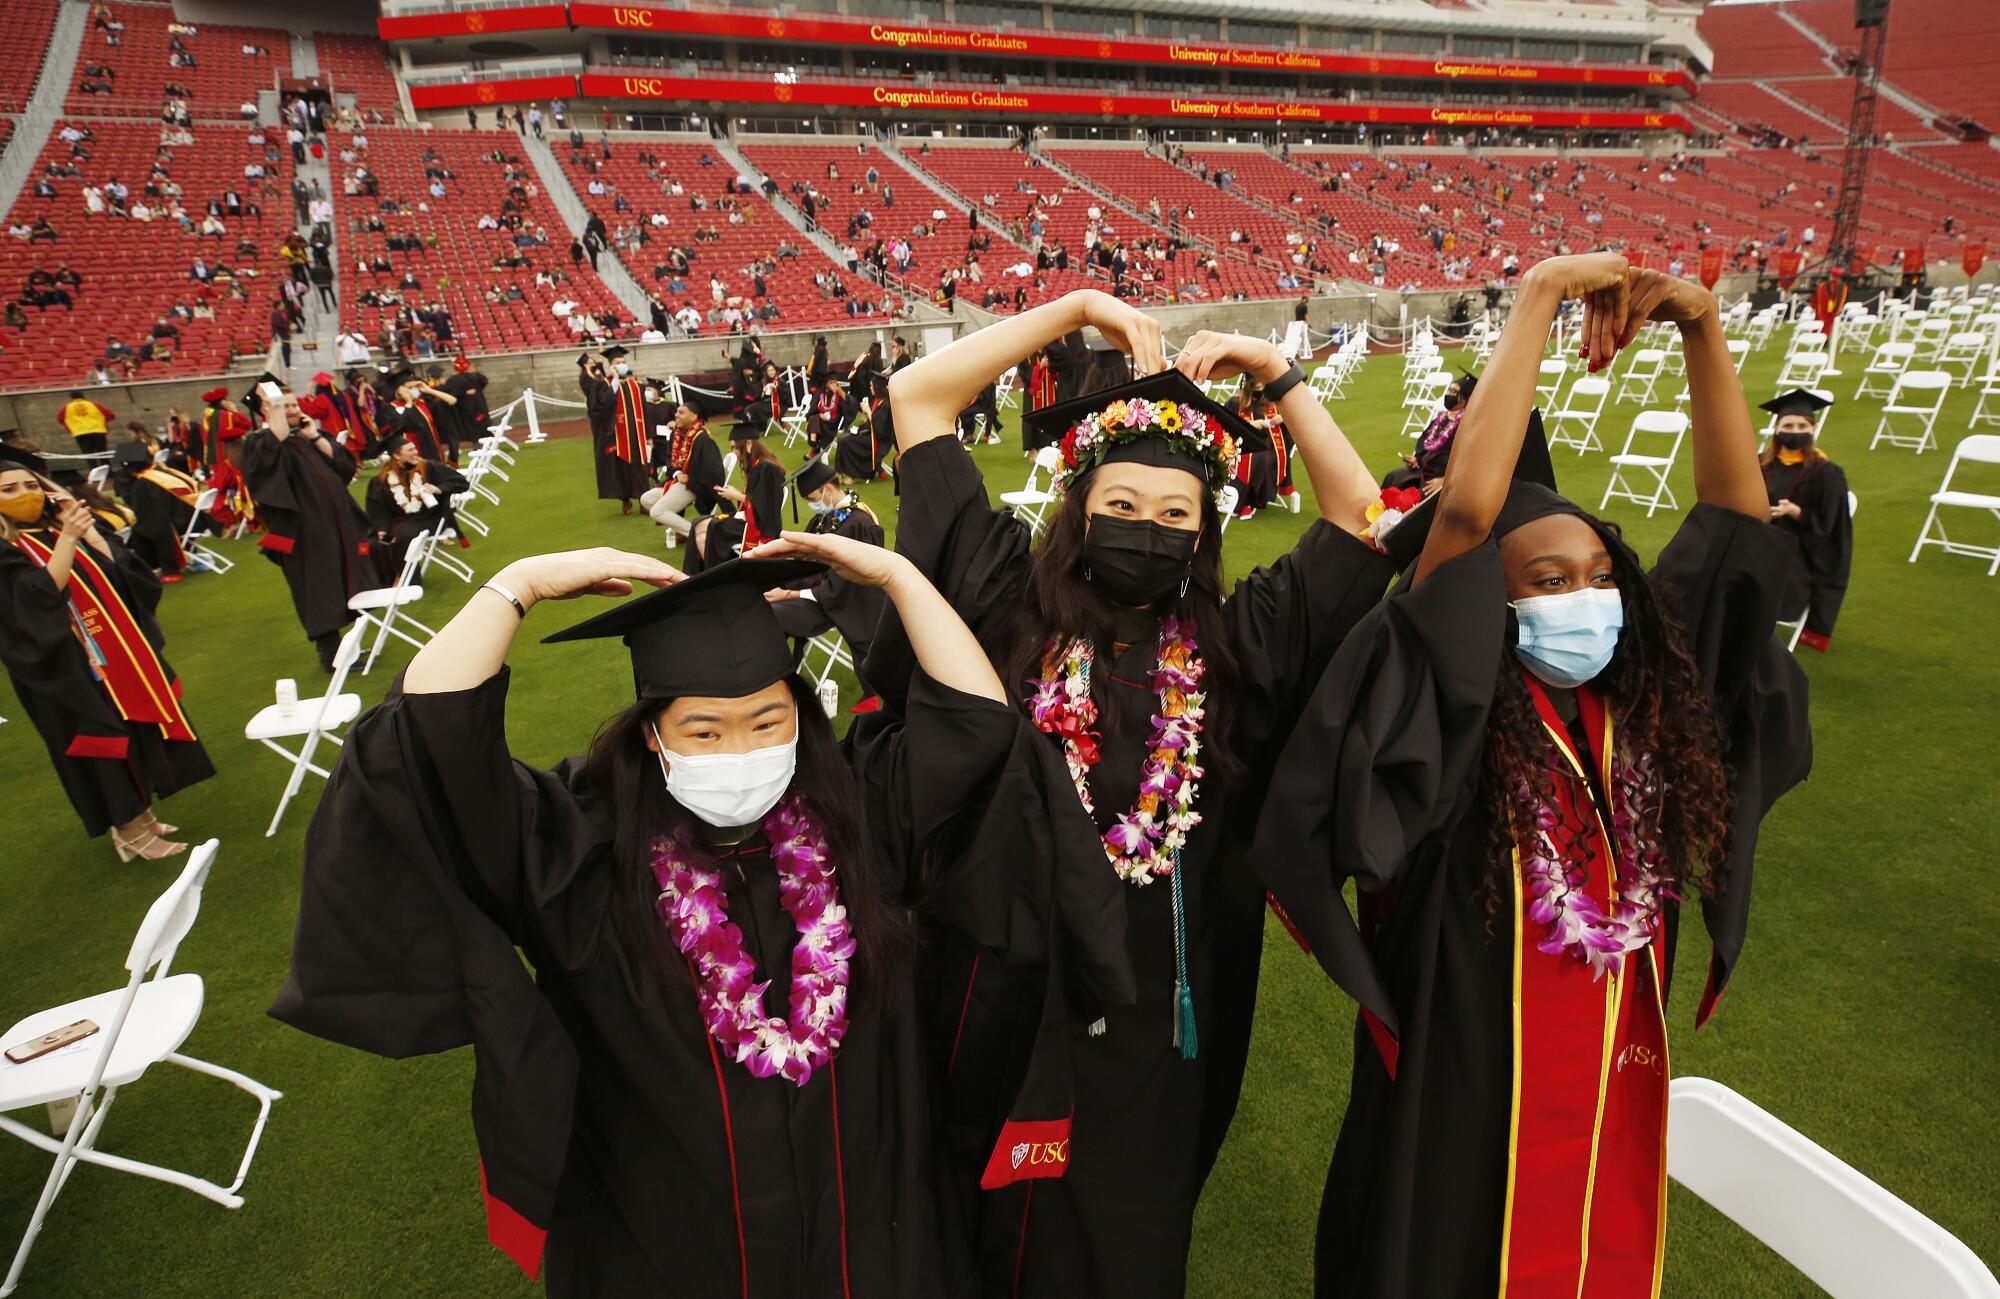 Three students in black graduation gowns arch their arms above their heads to form heart shapes